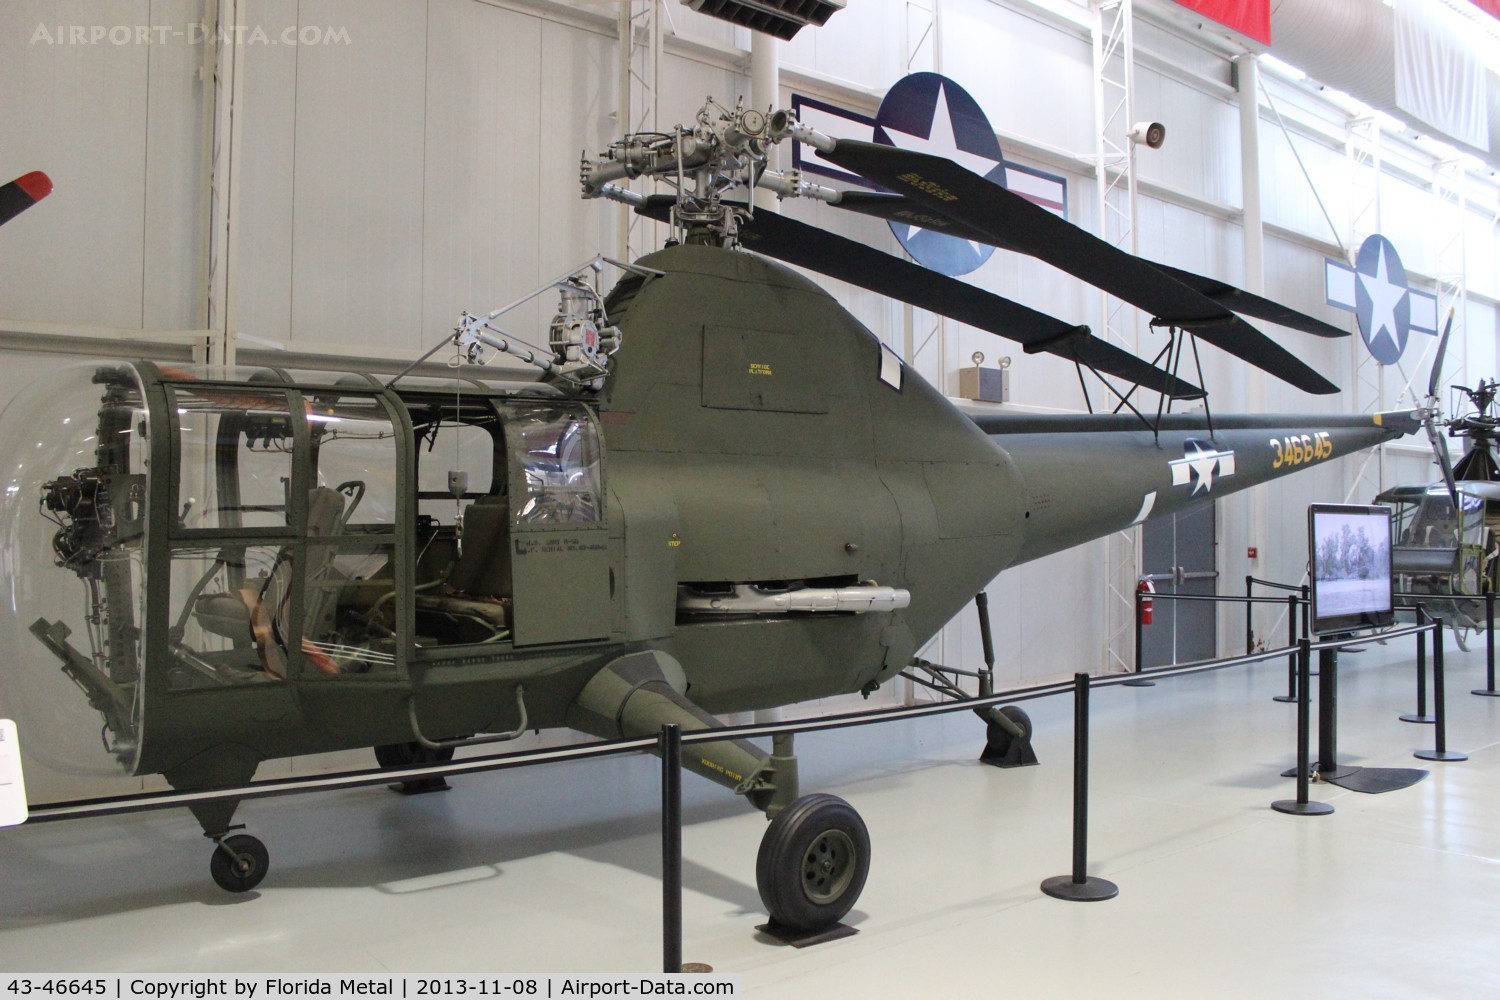 43-46645, 1944 Sikorsky R-5D Dragonfly C/N 188, R-5D Dragonfly at Ft. Rucker Army Aviation Museum